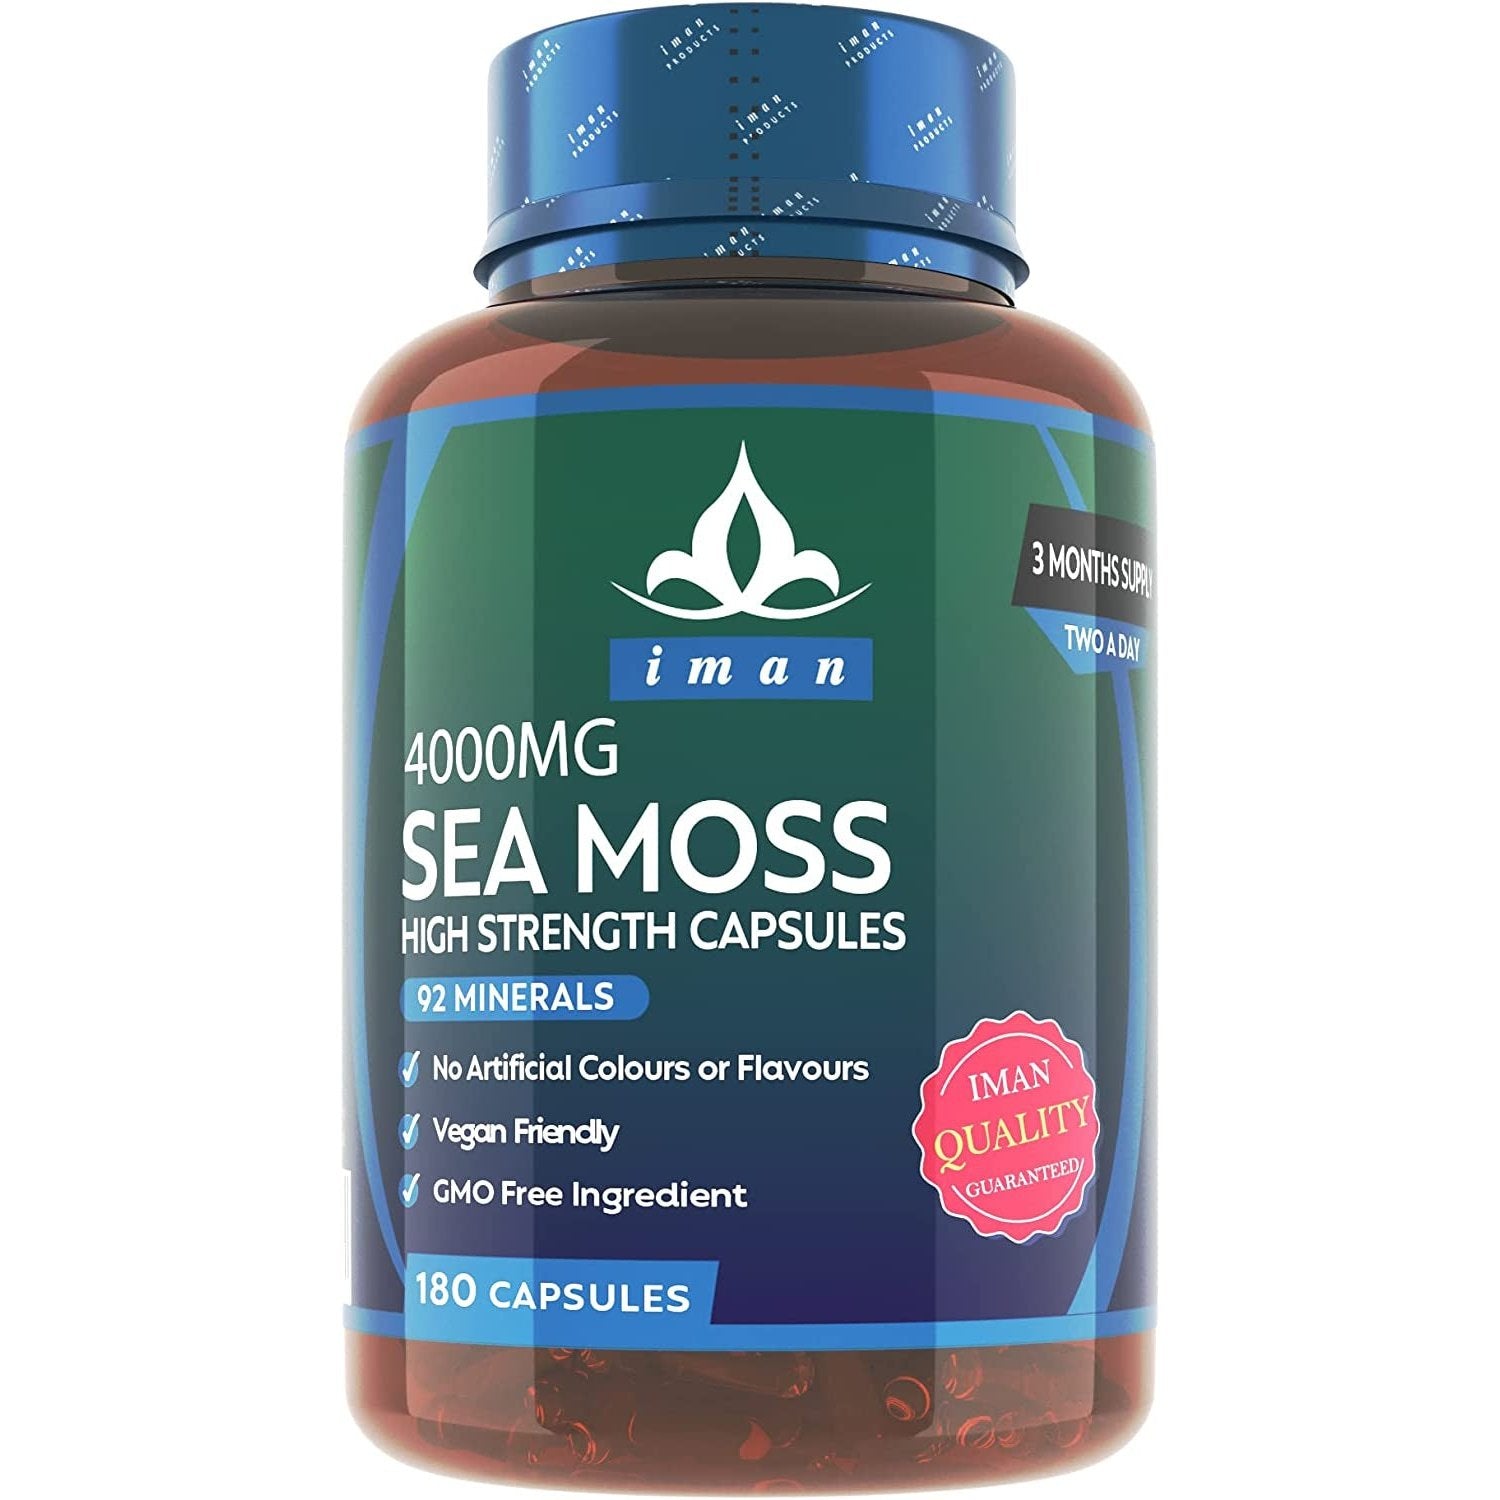 High Strength Sea Moss 4000Mg Capsules 180 Count Source of Iodine ...